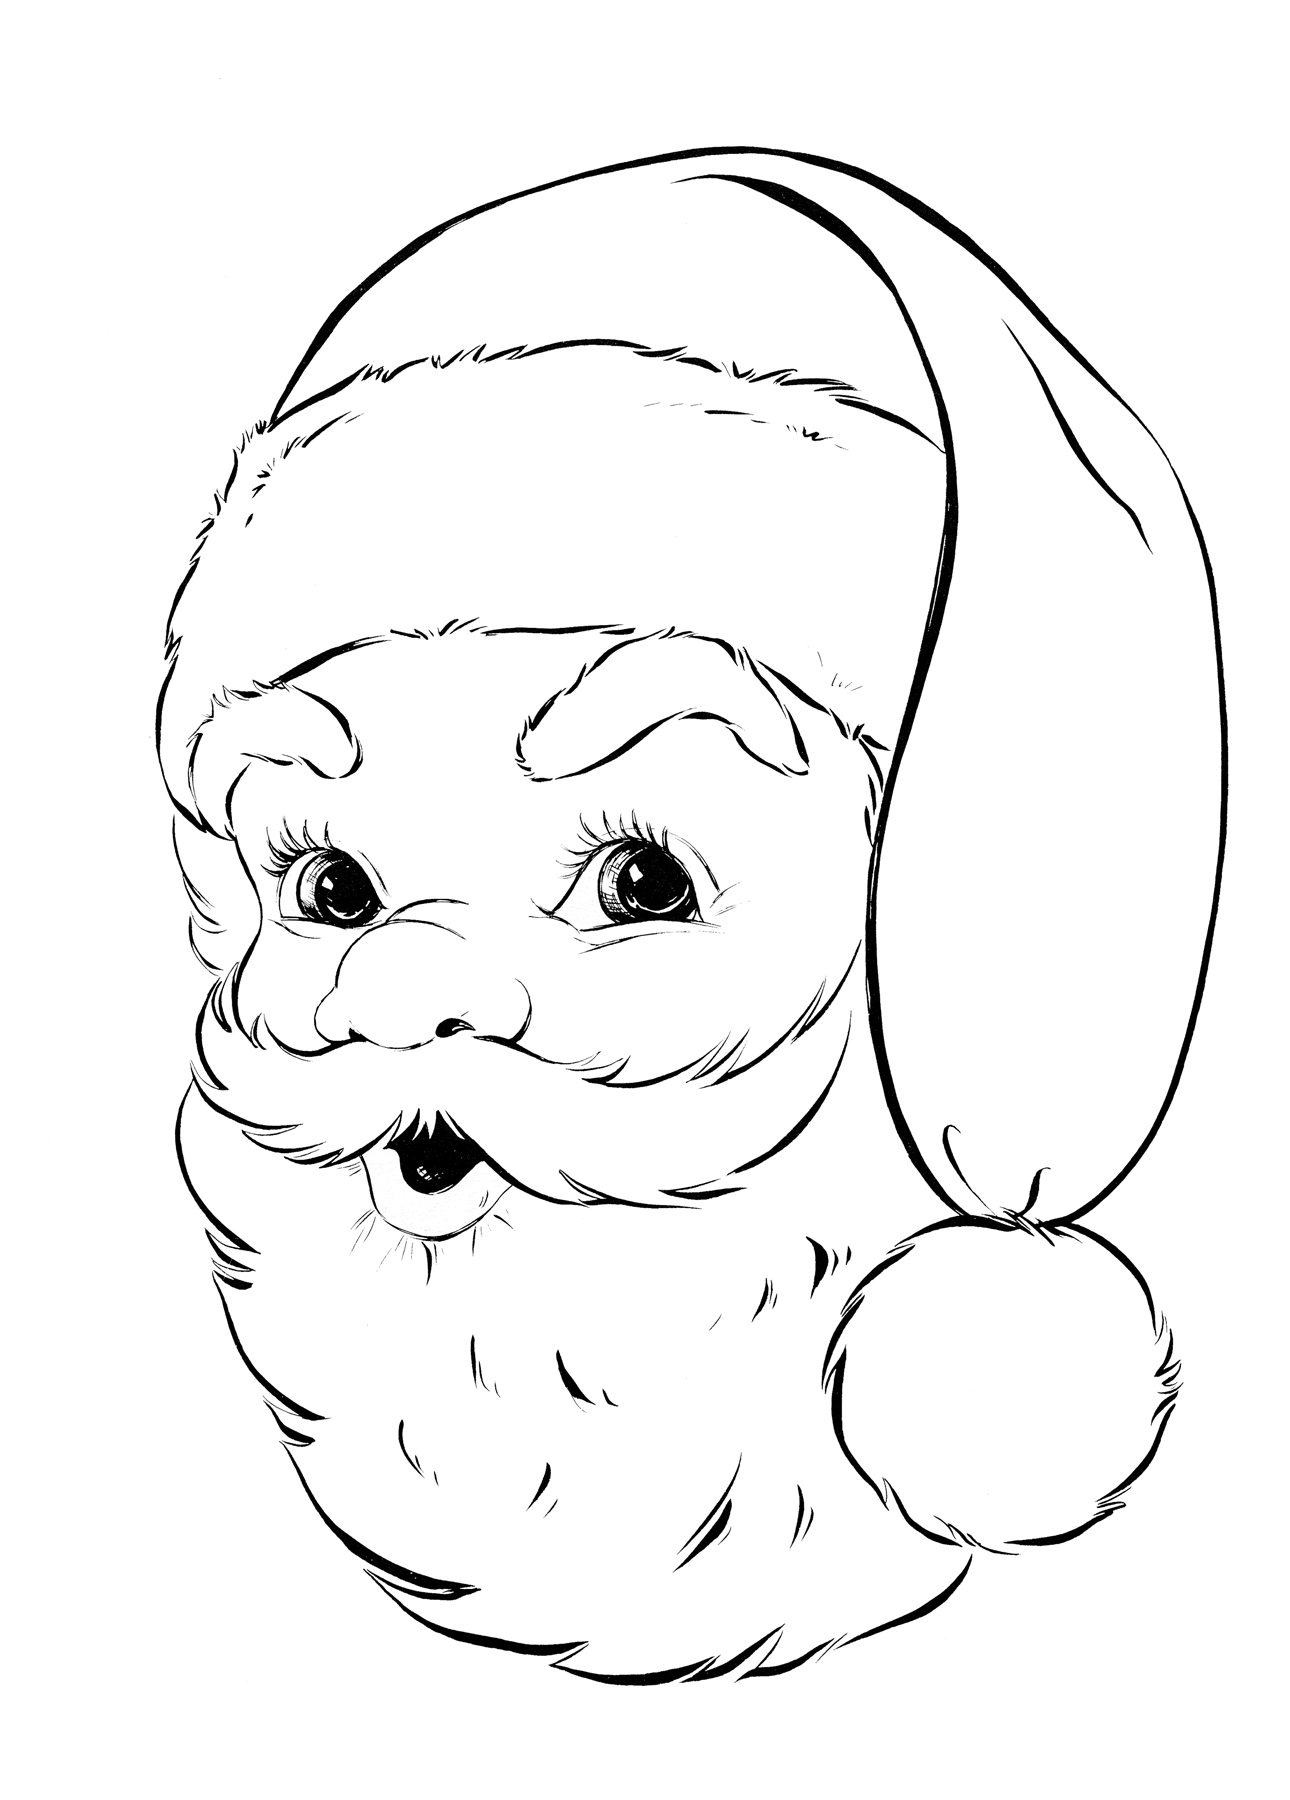 Santas Face Coloring Pages for Preschoolers